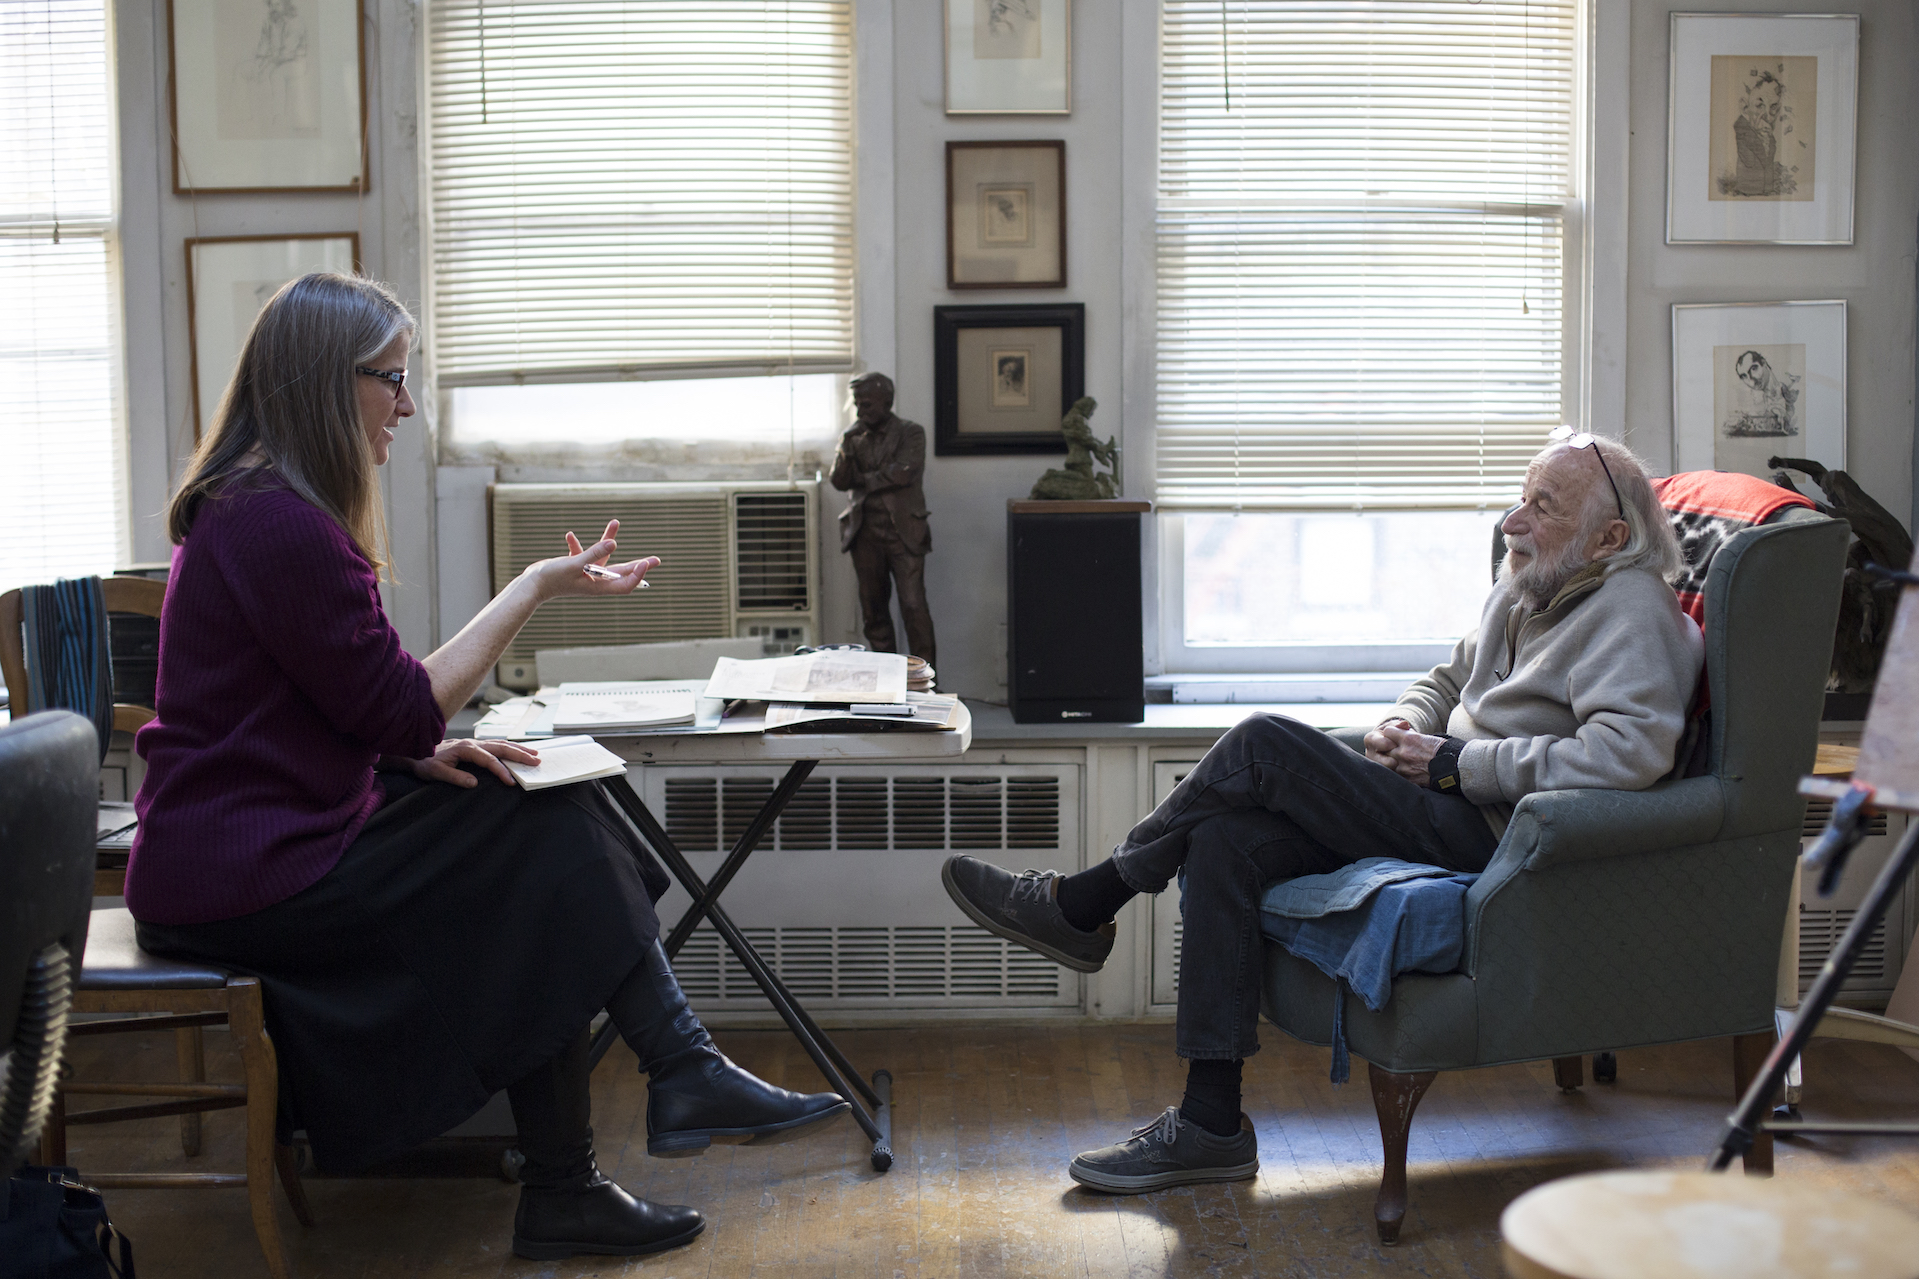 A woman engages in conversation with an older man in his New York artist studio. The walls are adorned with framed drawings.